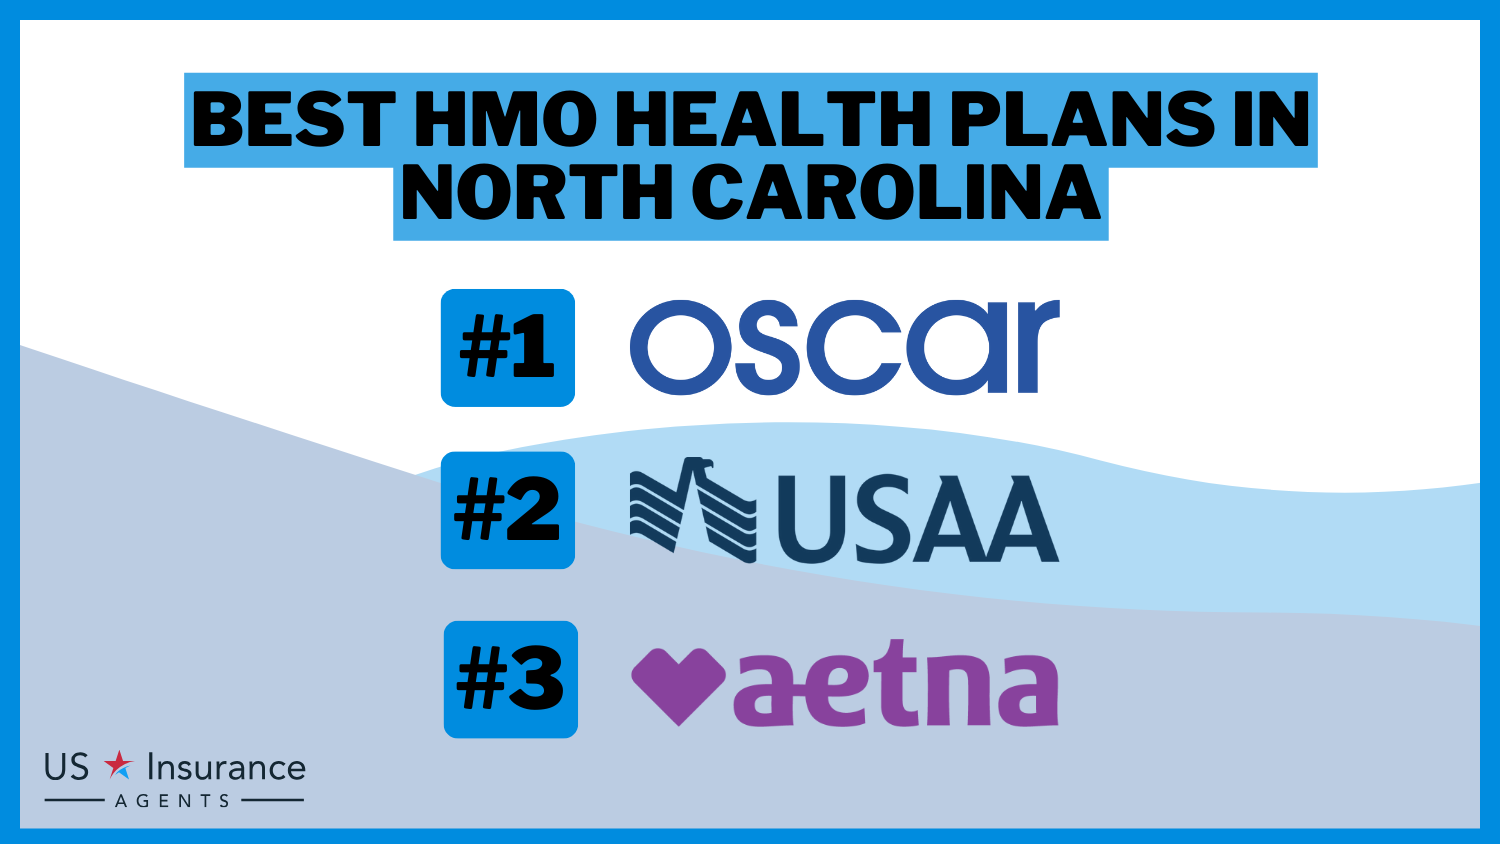 Best HMO Health Plans in North Carolina: Oscar, USAA, and Aetna